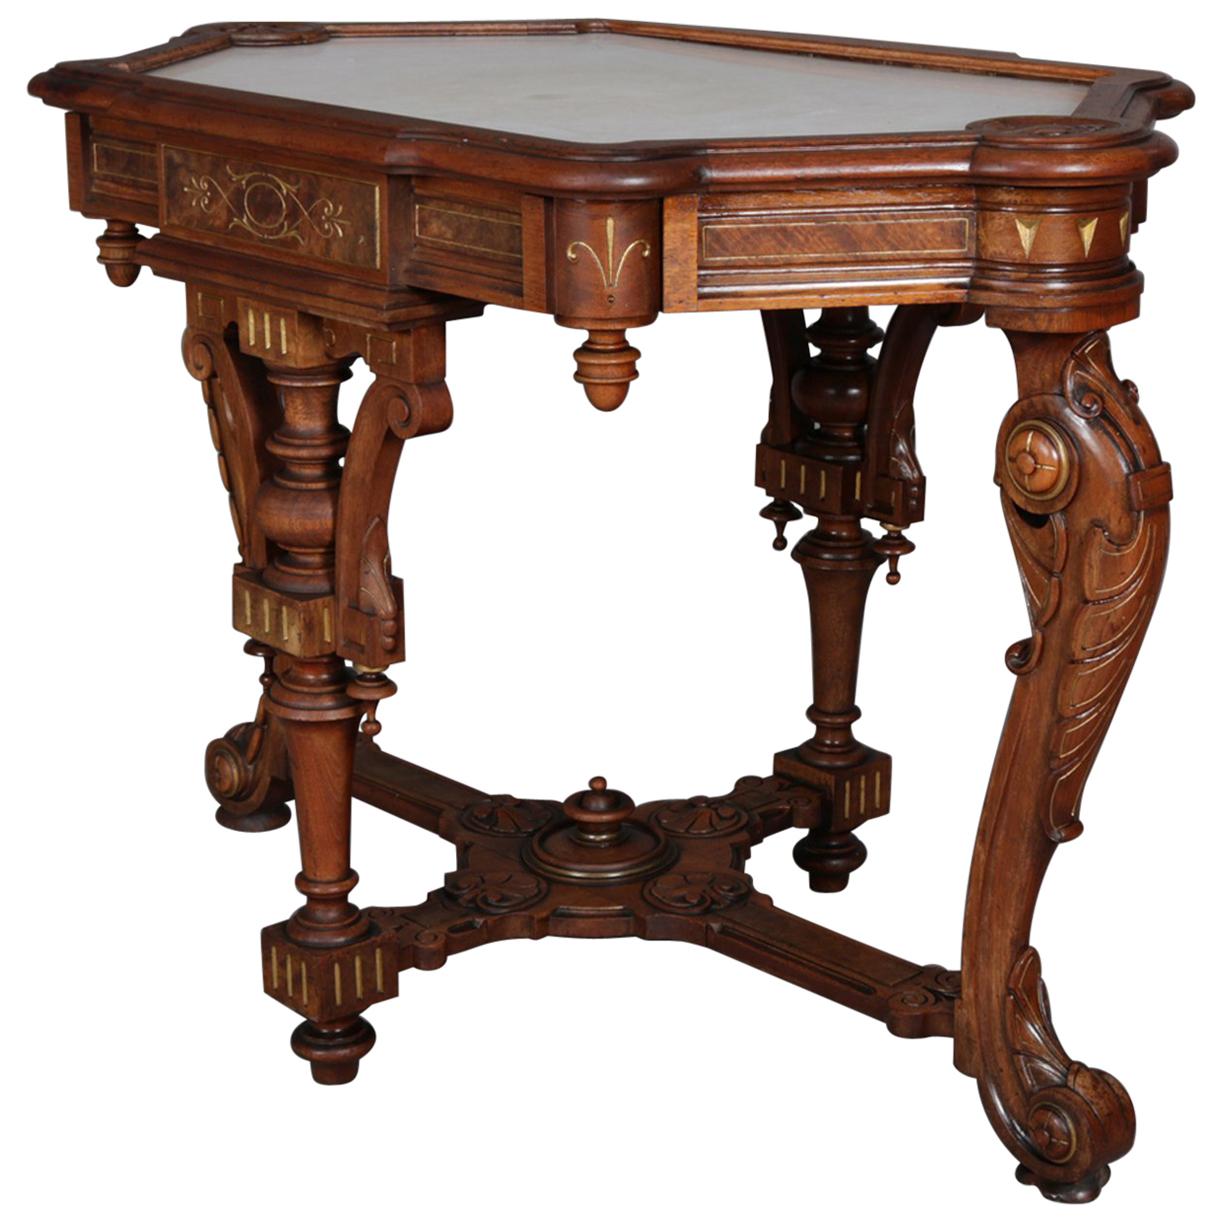 Antique Neo Greco Carved Walnut, Burl and Gilt Marble-Top Table, circa 1880